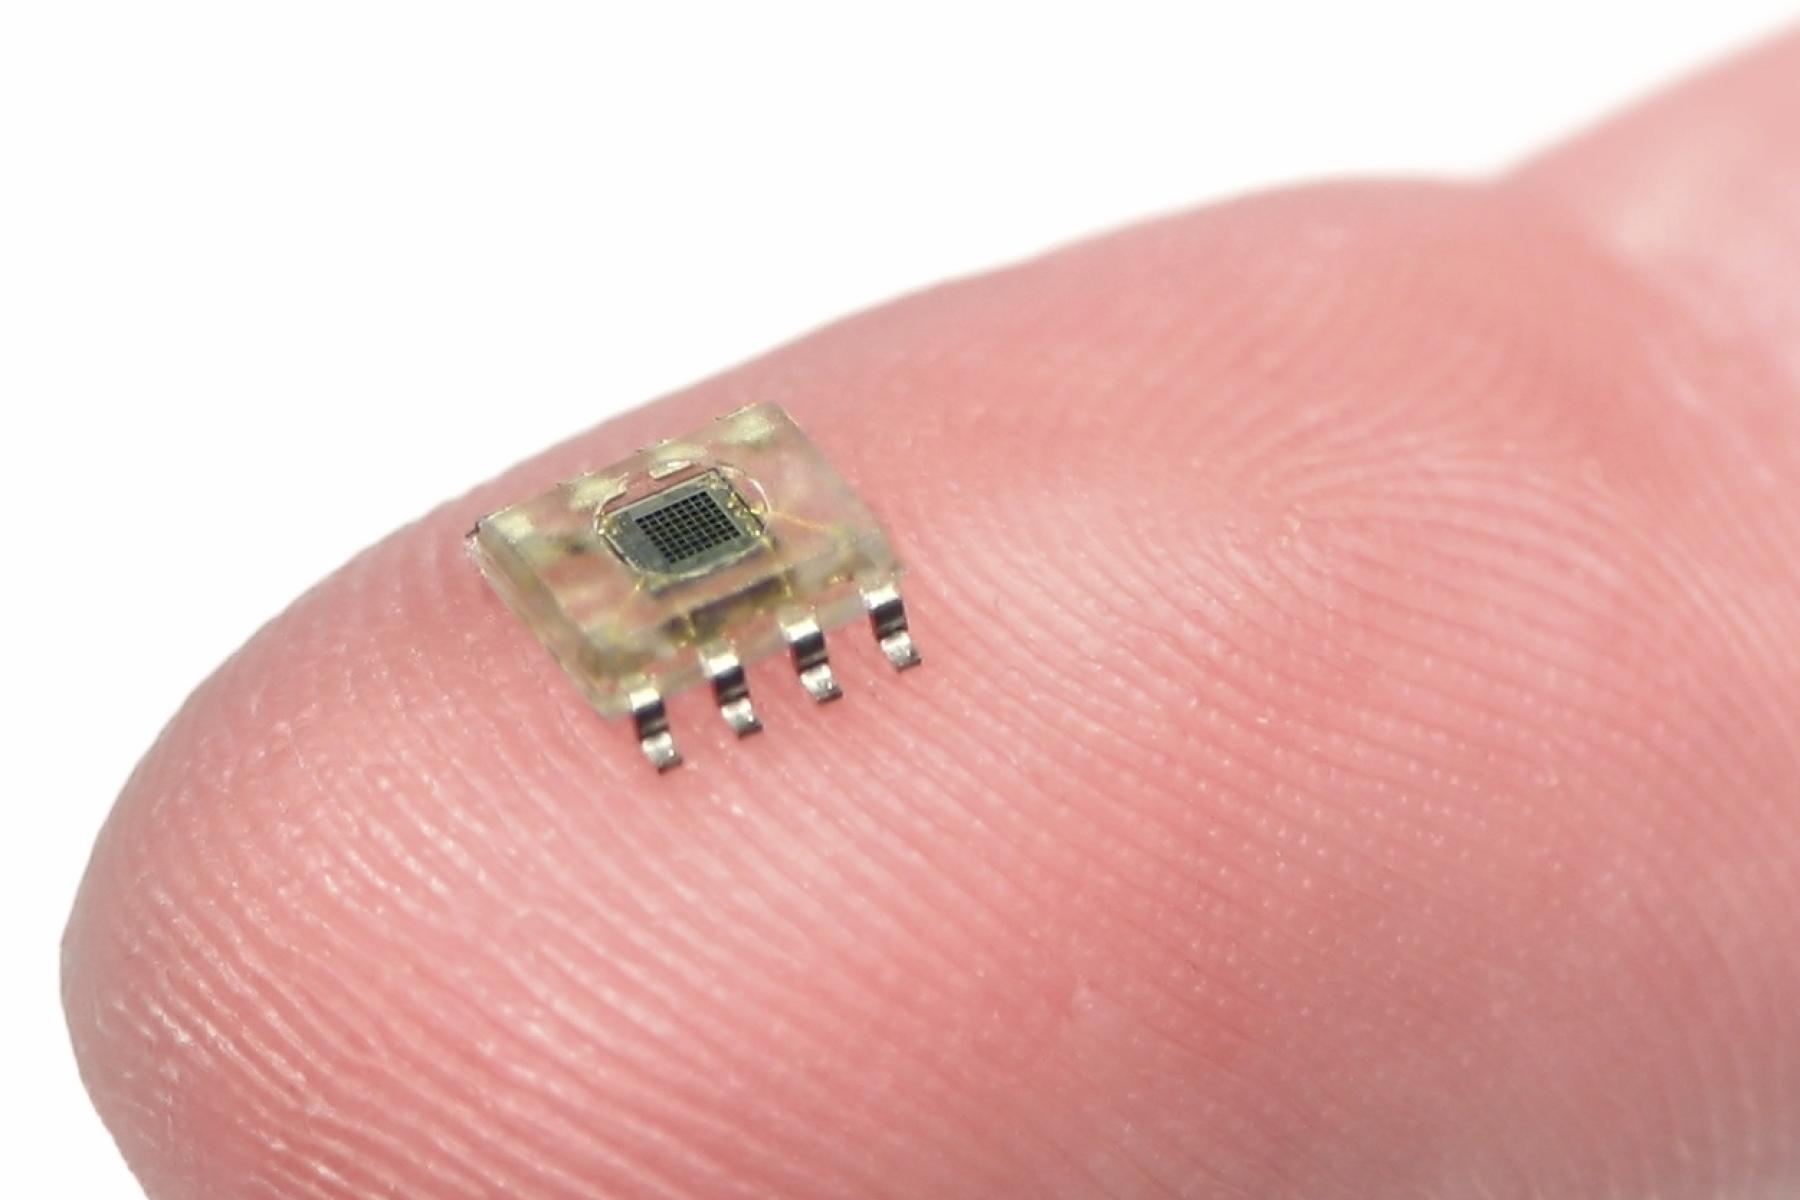 A small microchip lying on a person's fingertip.